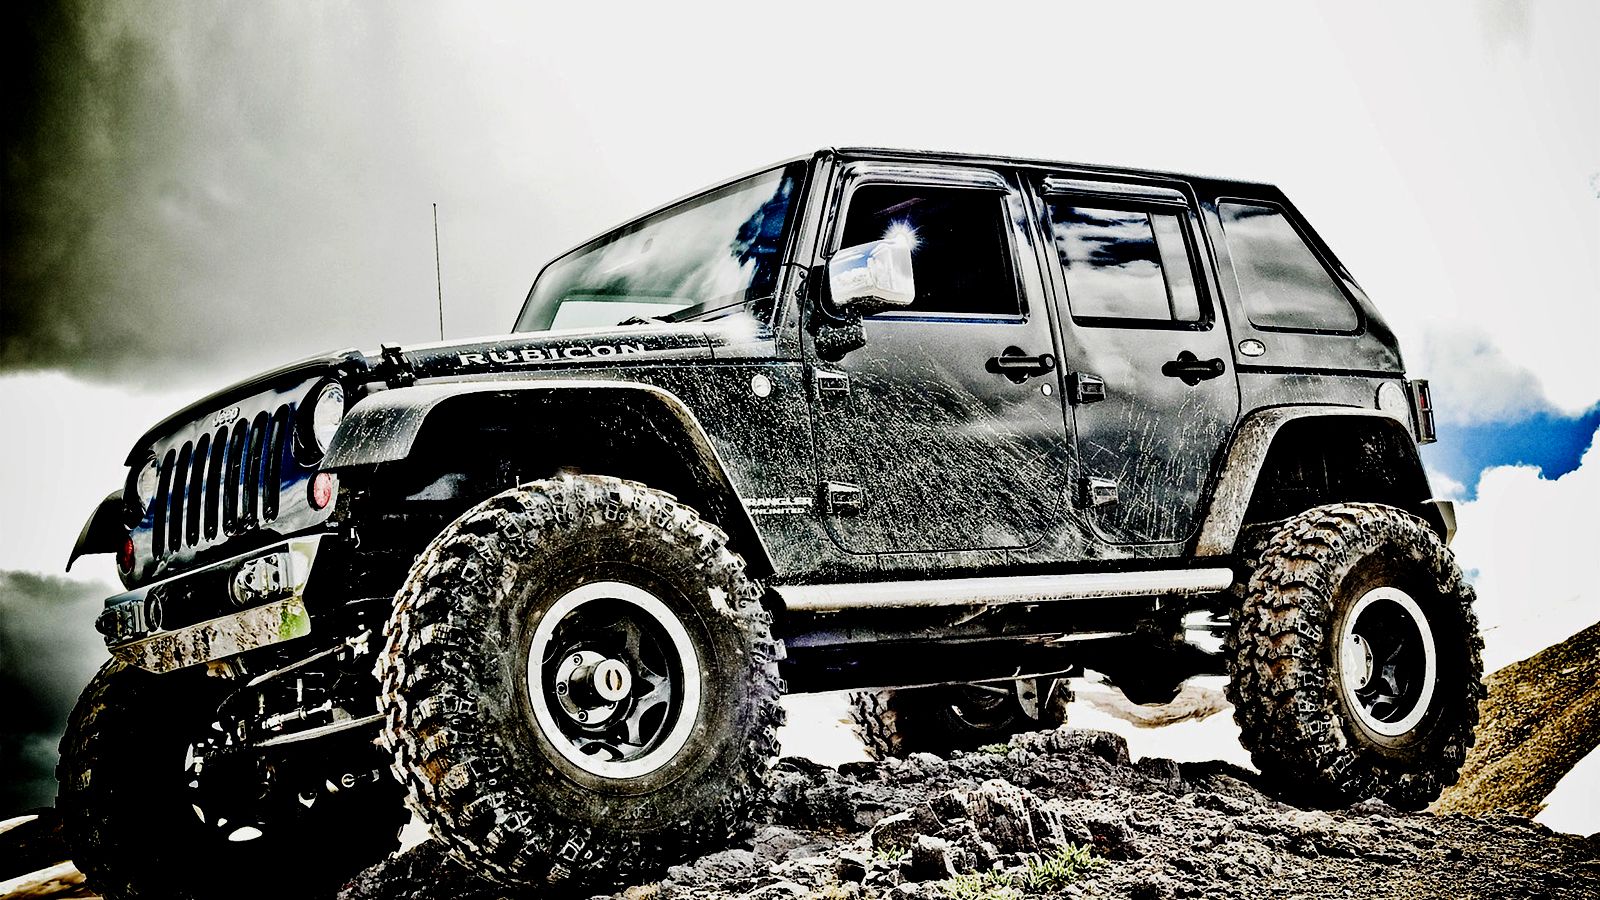 Offroading Background